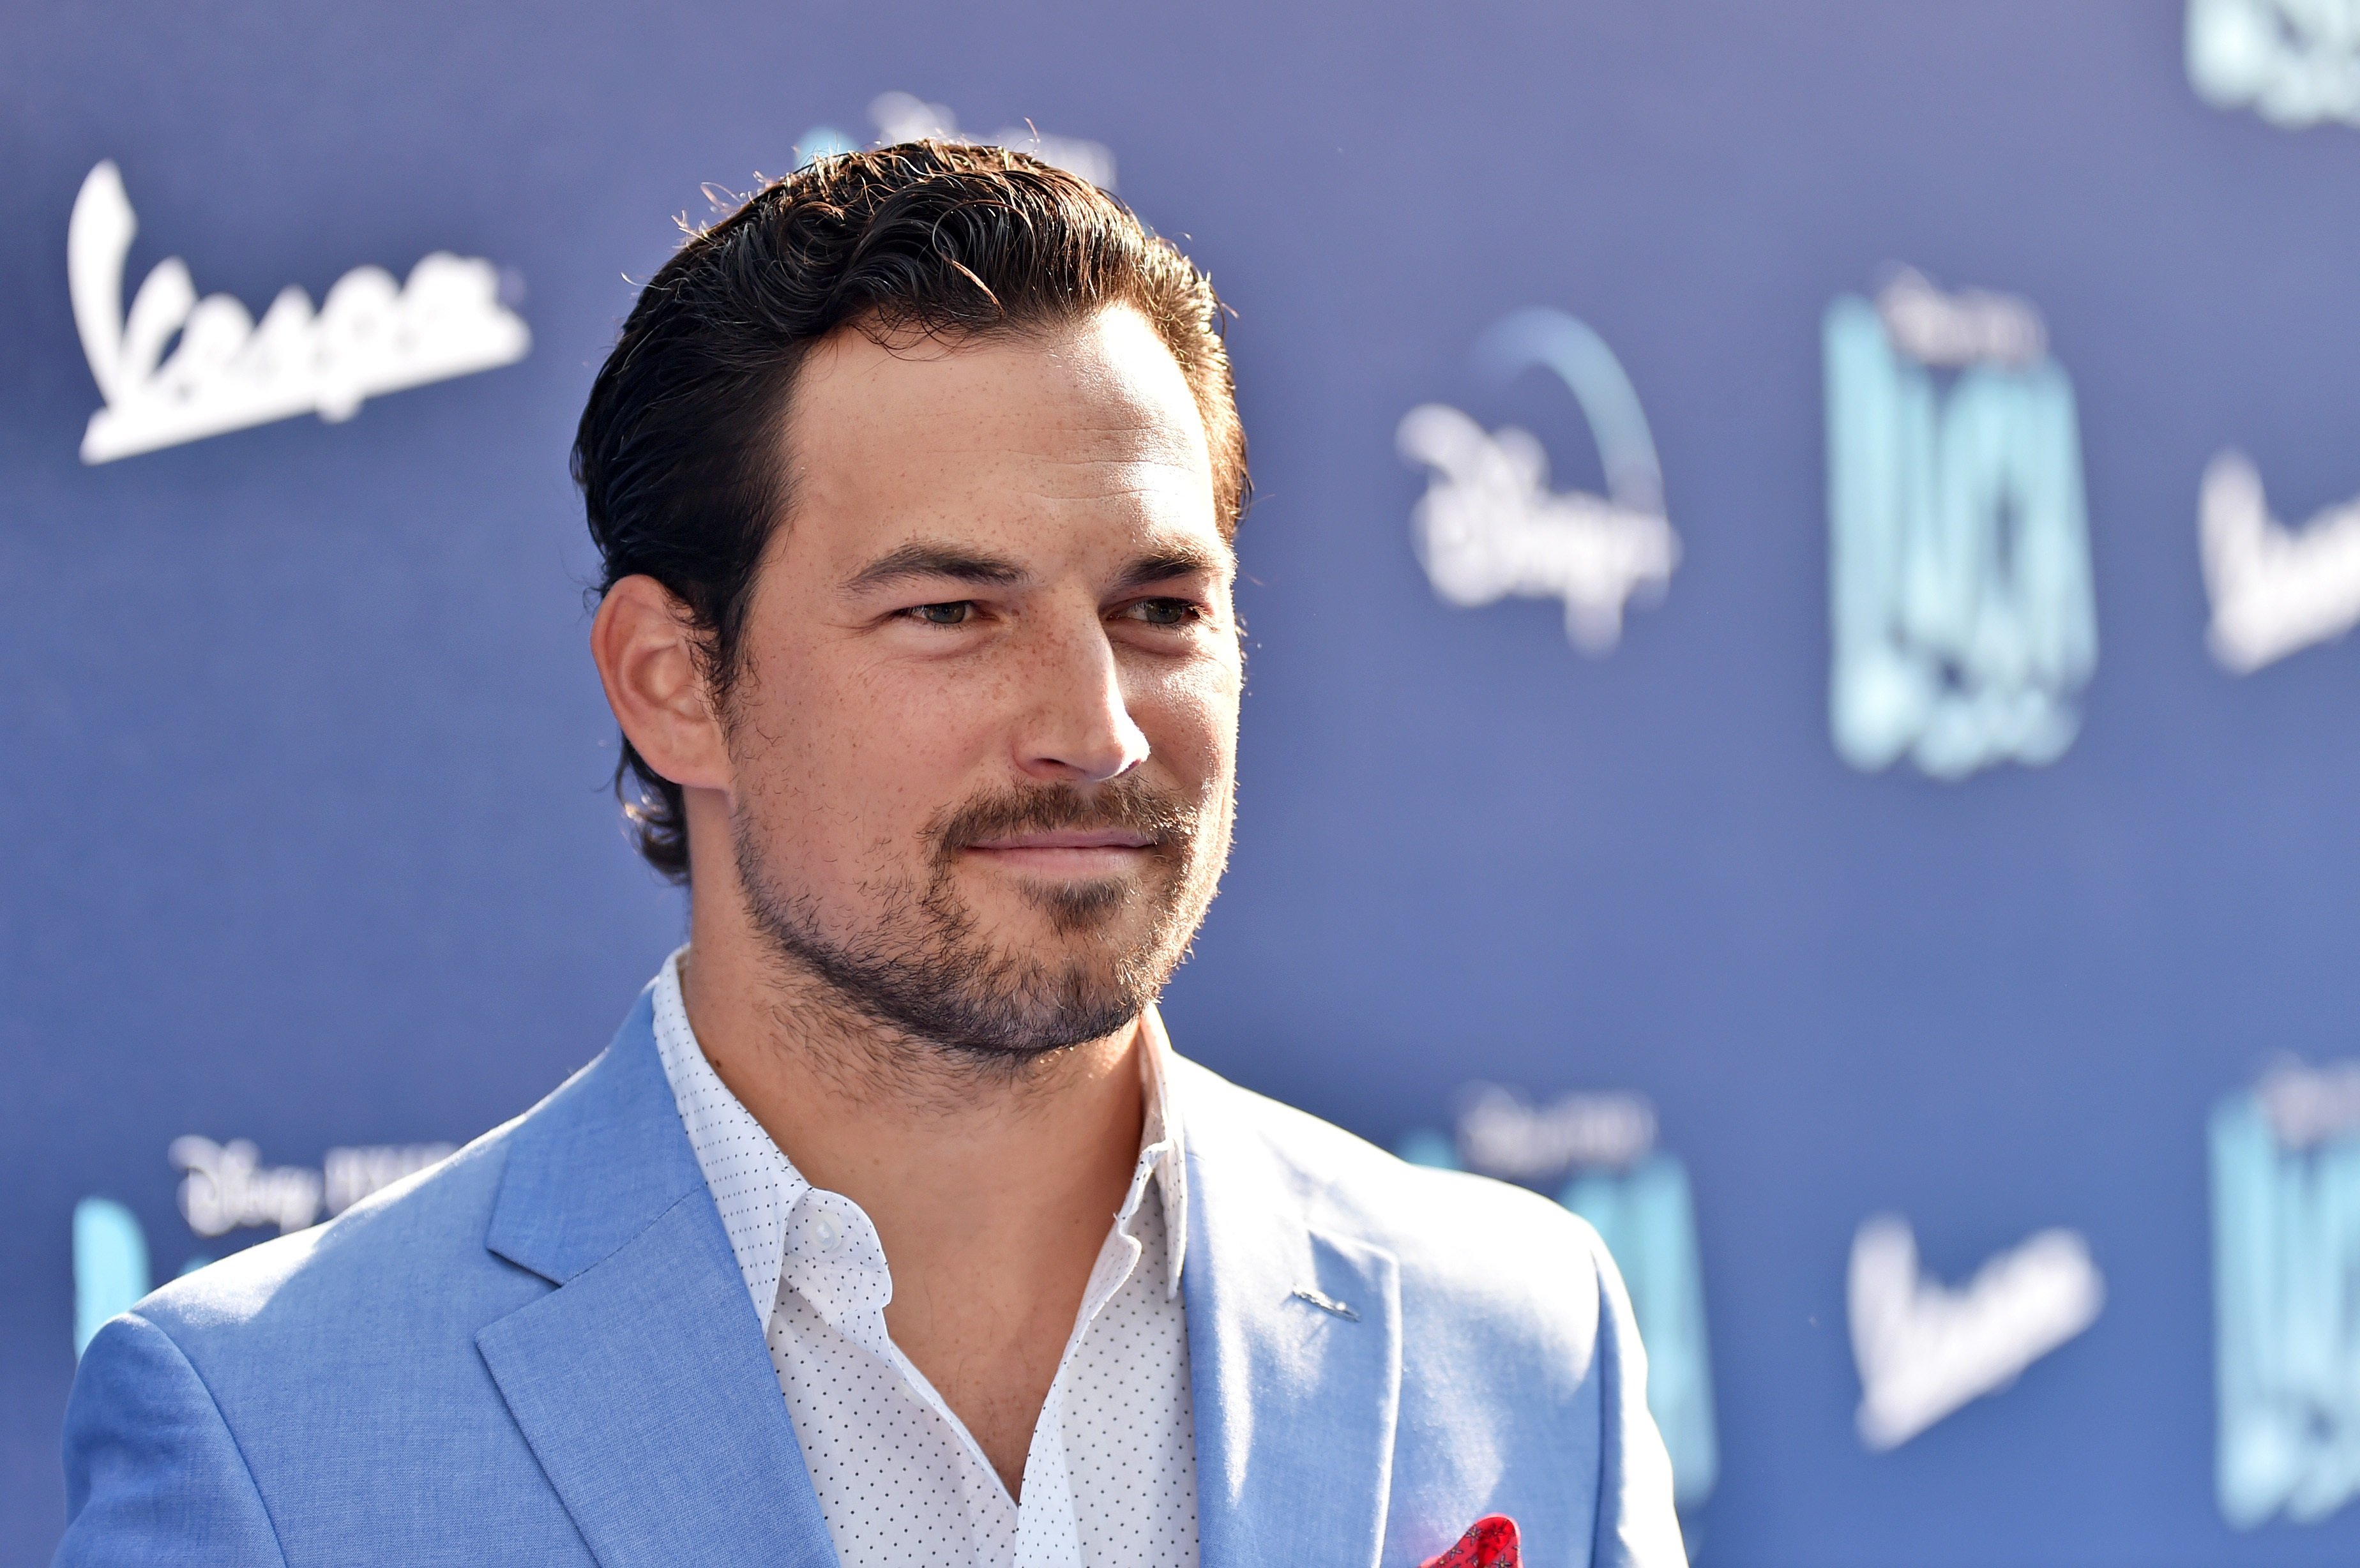 Giacomo Gianniotti arrived at the Luca Movie Premiere